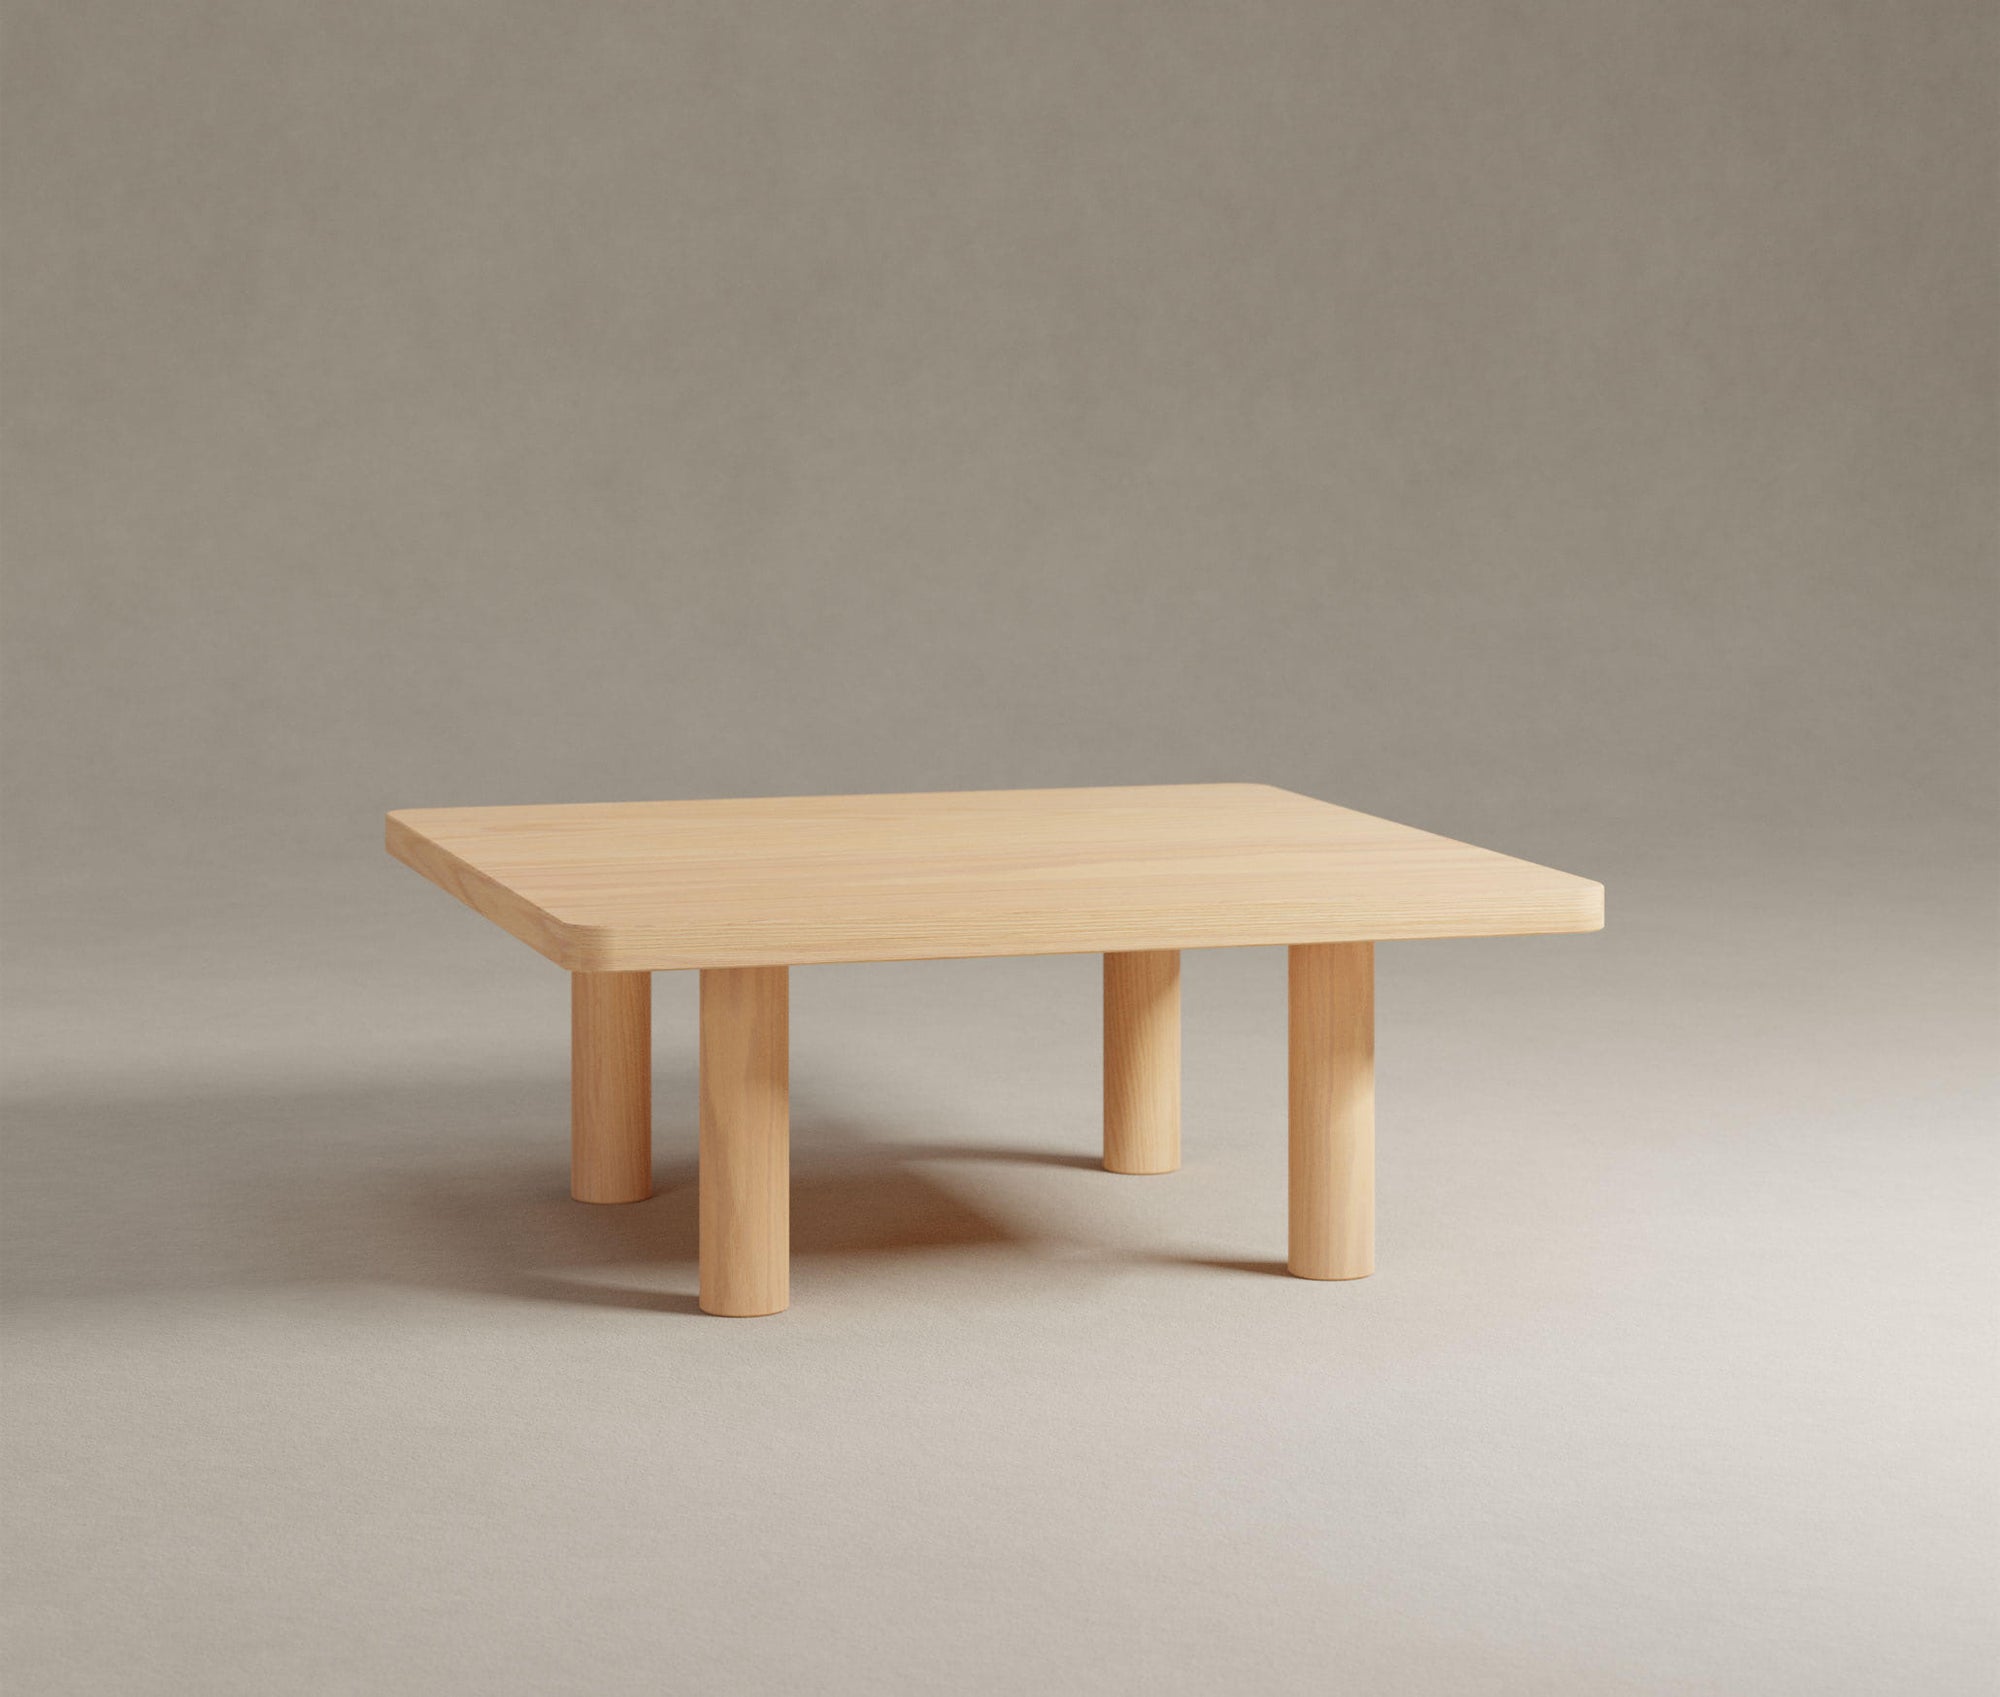 The Coffee Table [Square]